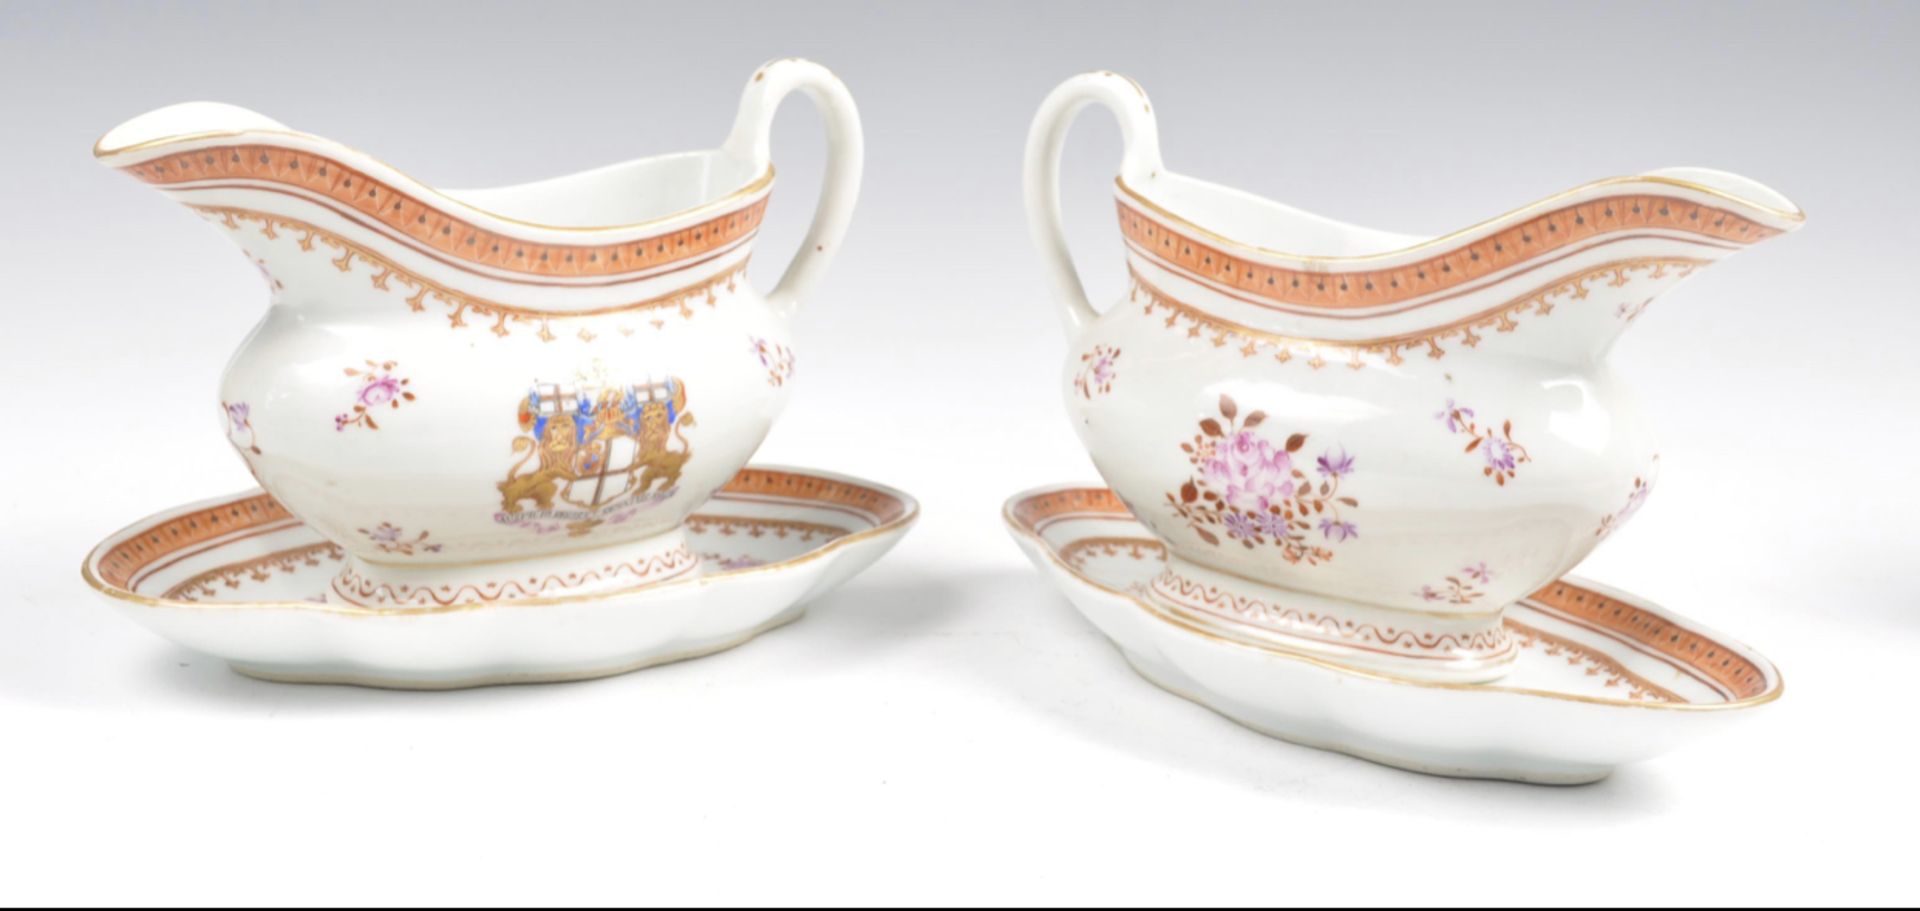 Pair of Samson engraved gravy boats and stands